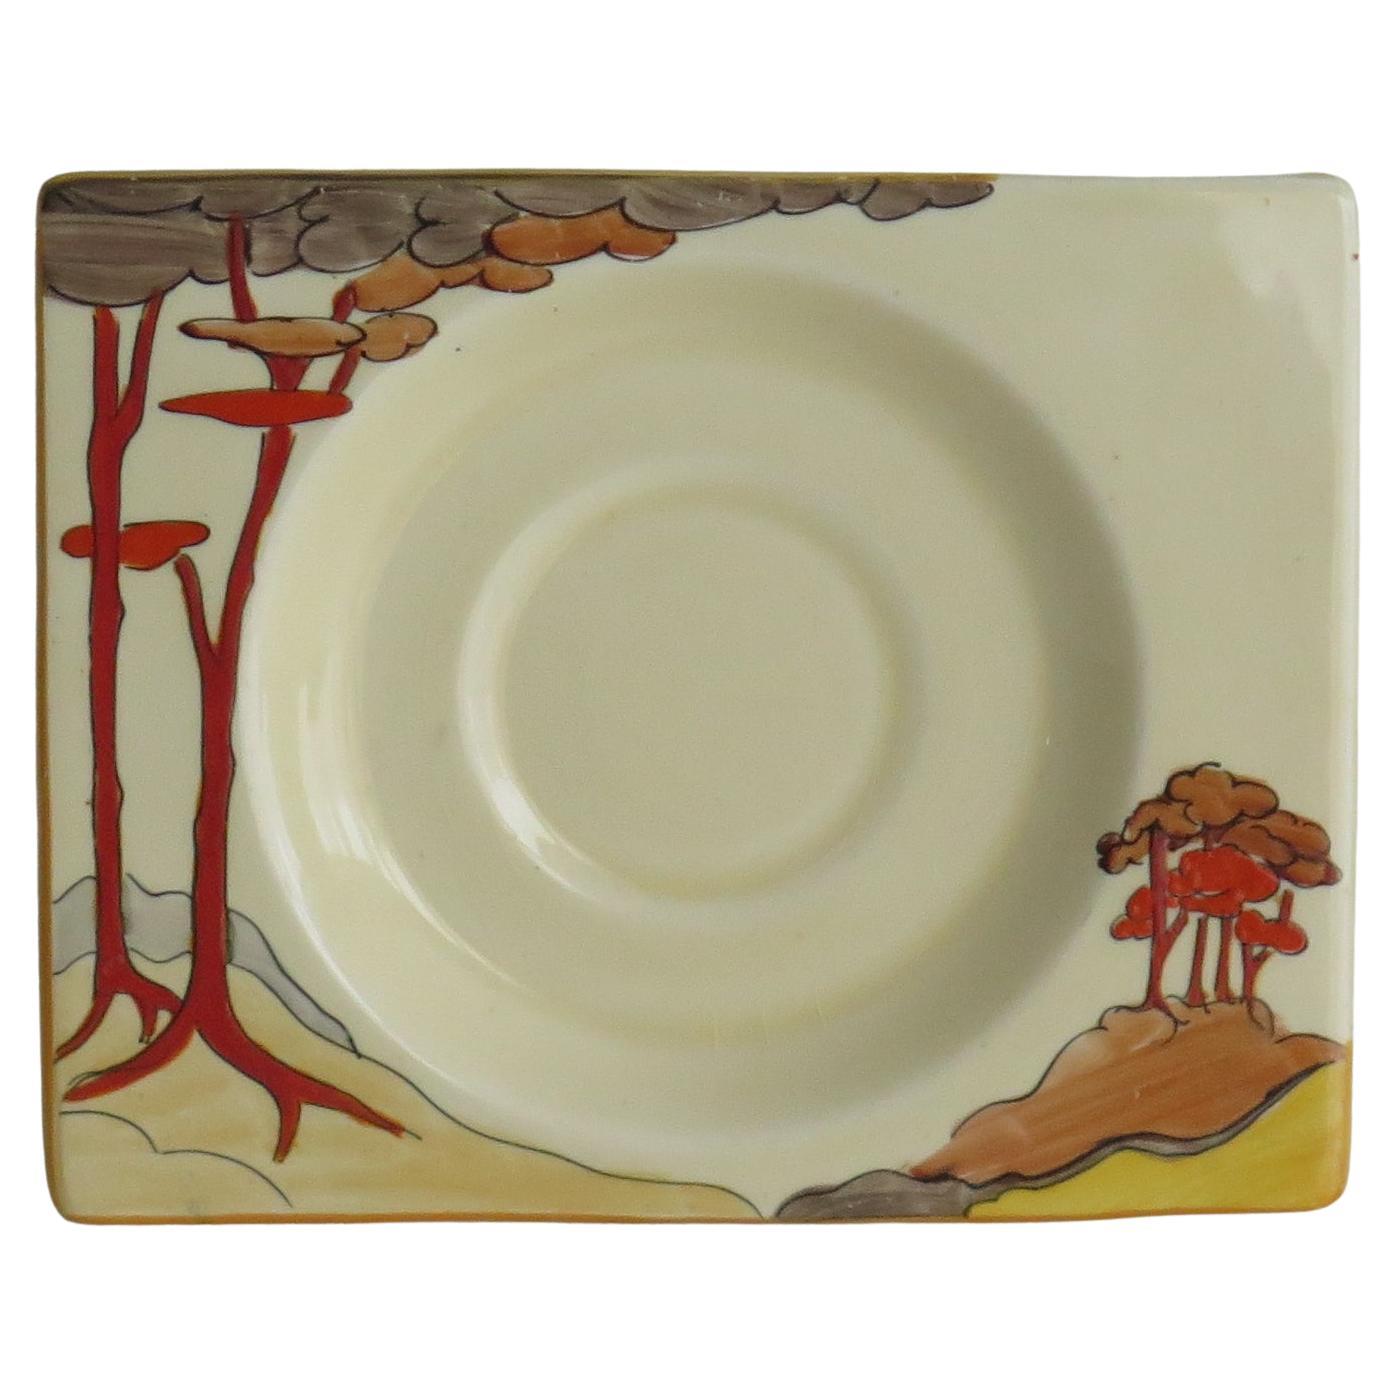 Clarice Cliff Saucer Dish in Coral Firs Pattern Biarritz Shape, Circa 1935 For Sale